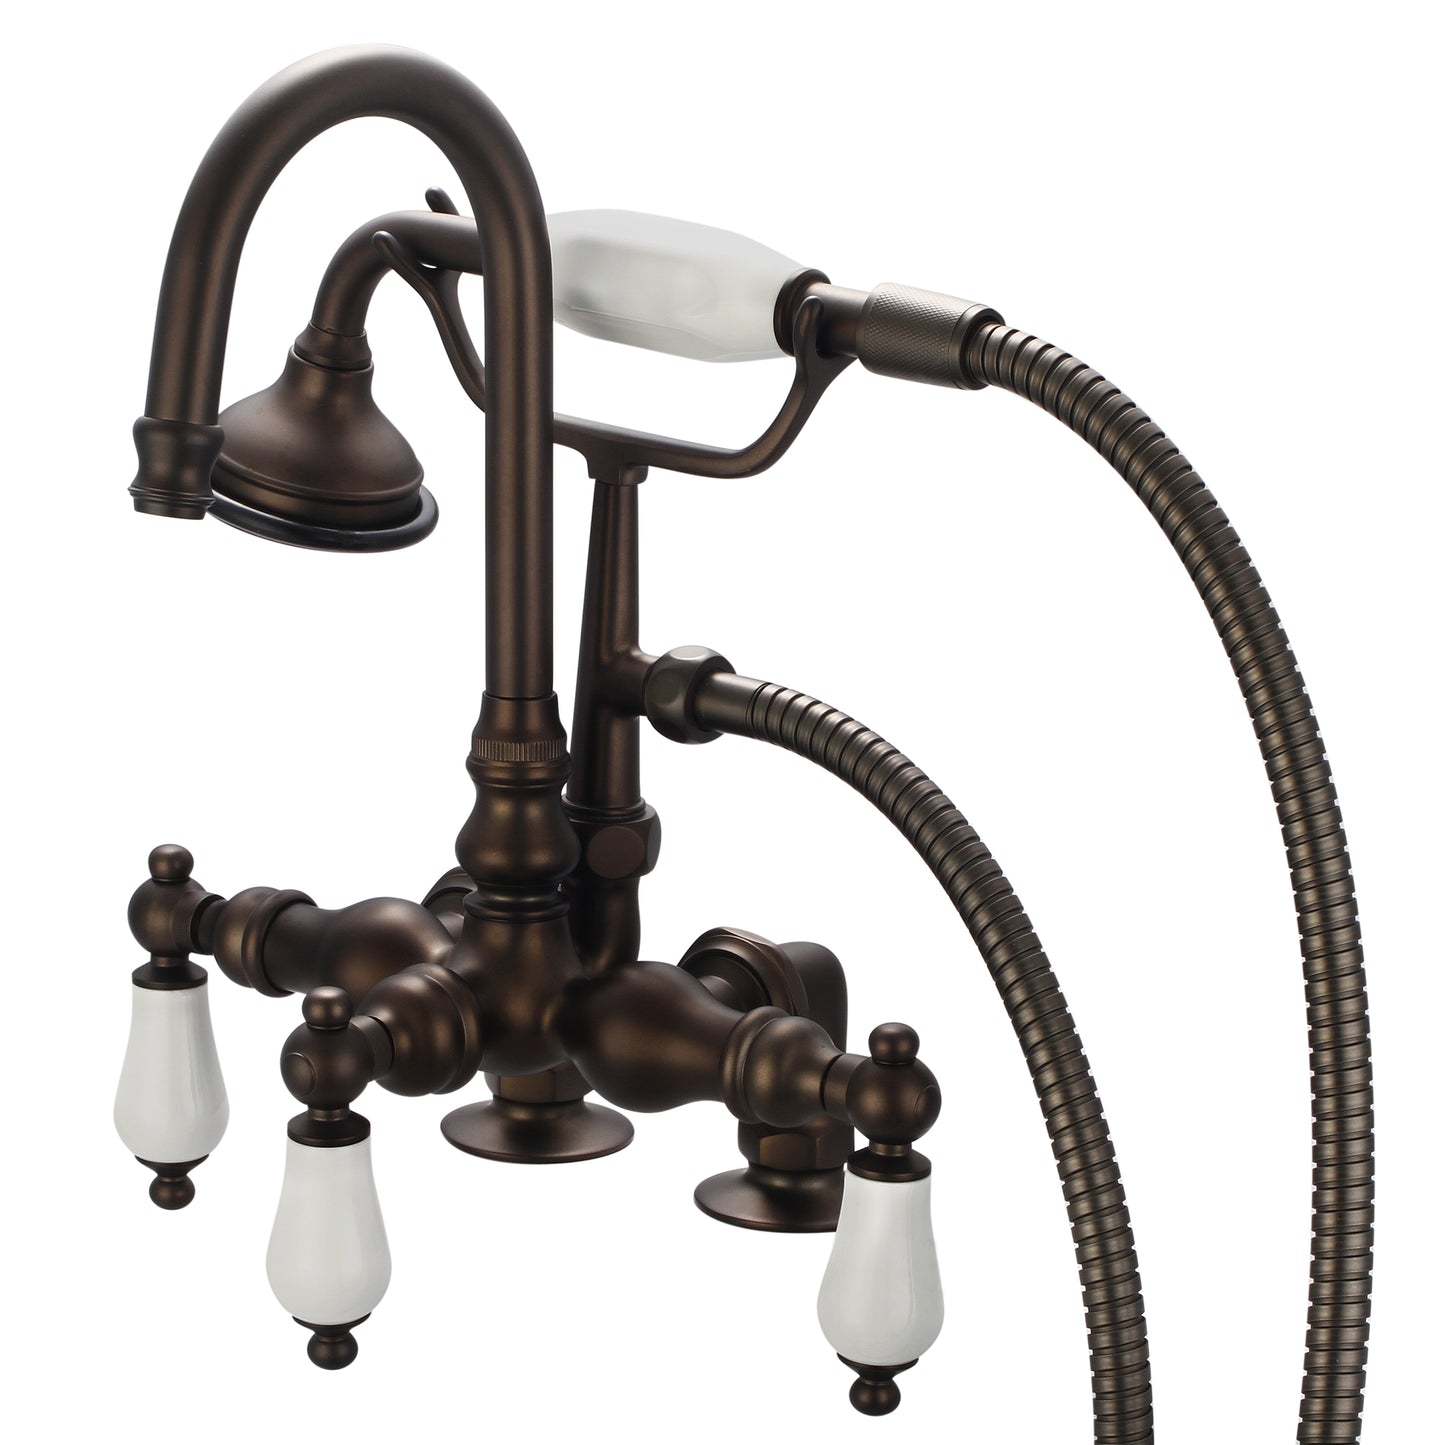 Vintage Classic 3.375" Center Deck Mount Tub Faucet With Gooseneck Spout, 2" Risers & Handheld Shower in Oil Rubbed Bronze Finish, With Porcelain Lever Handles Without labels